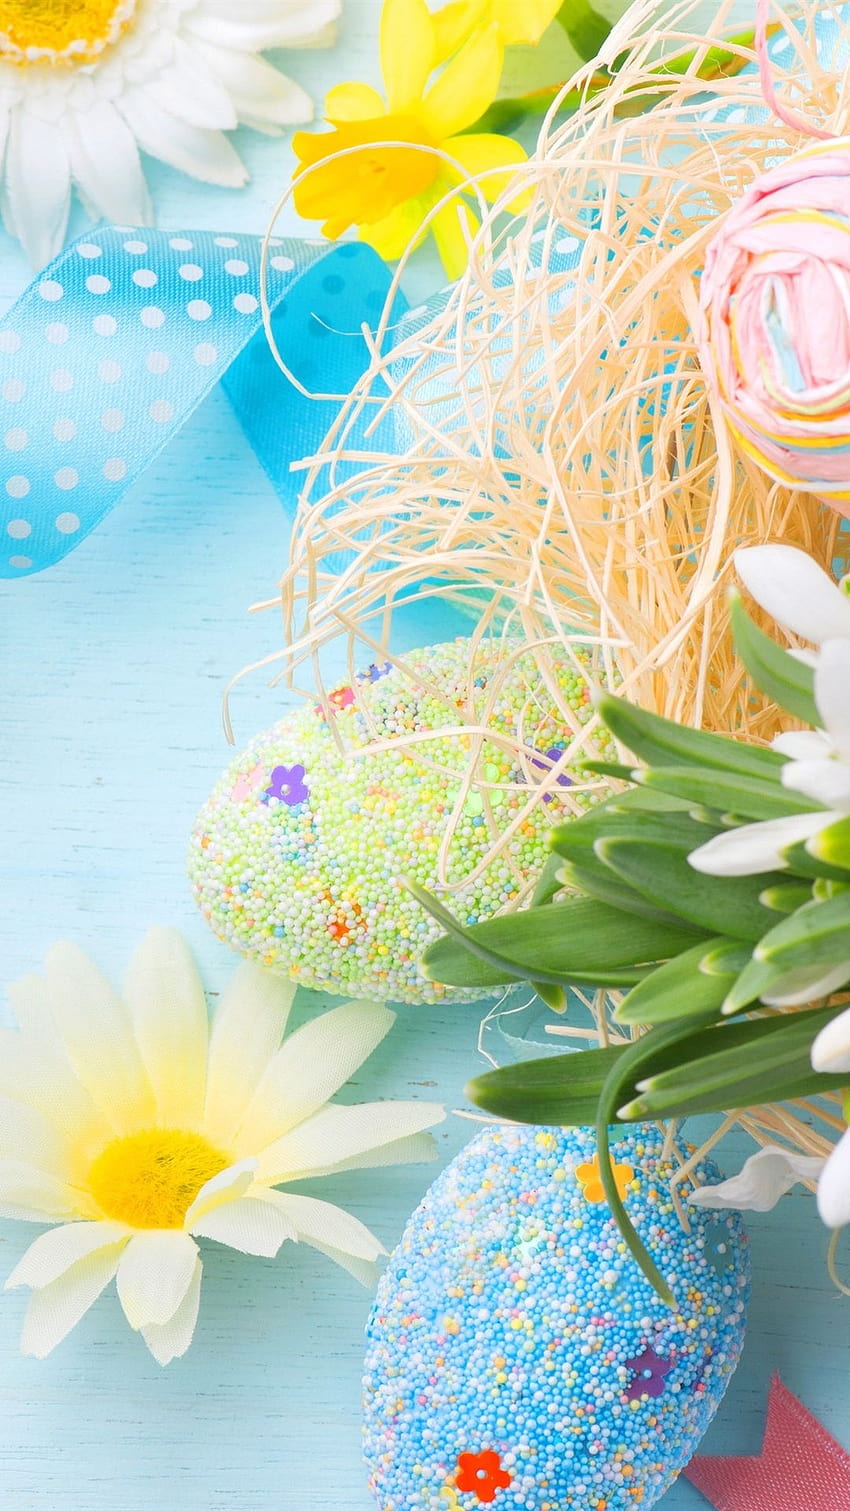 Spring, Easter, colorful eggs, flowers 1080x1920 iPhone 8/7/6/6S, easter iphone HD phone wallpaper